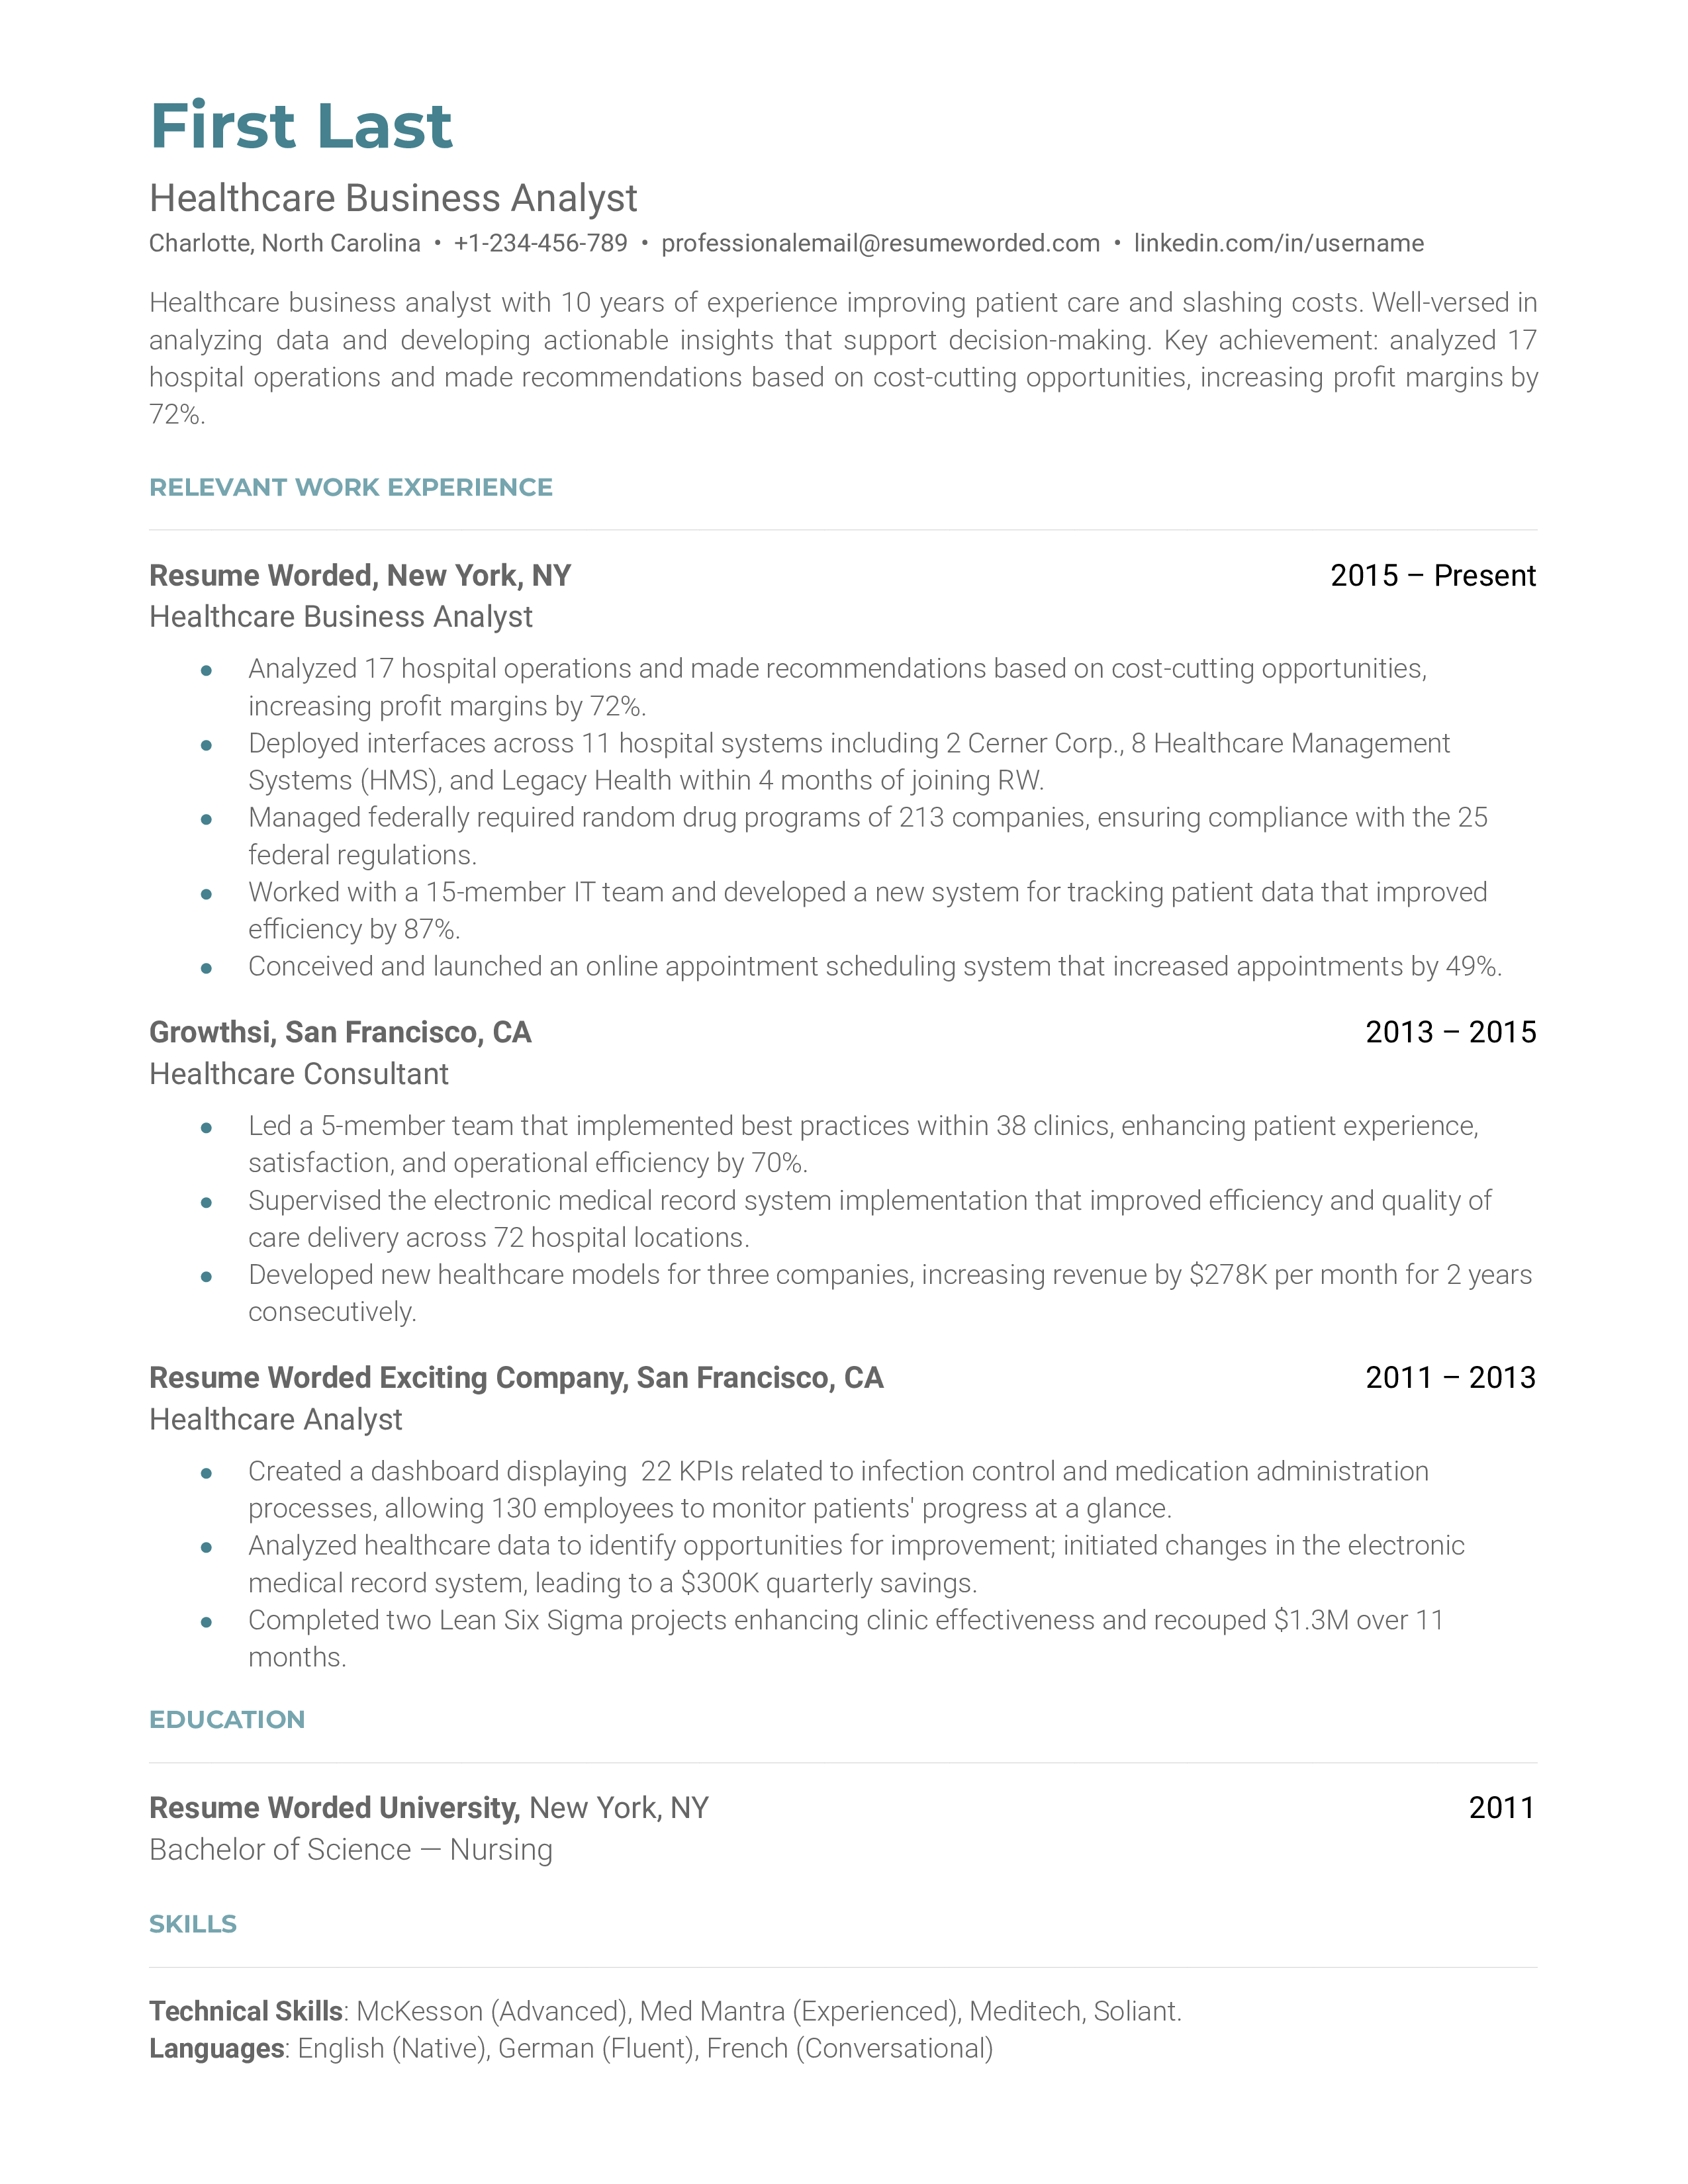 A healthcare business analyst resume sample that highlights the applicant's healthcare experience and qualifications.